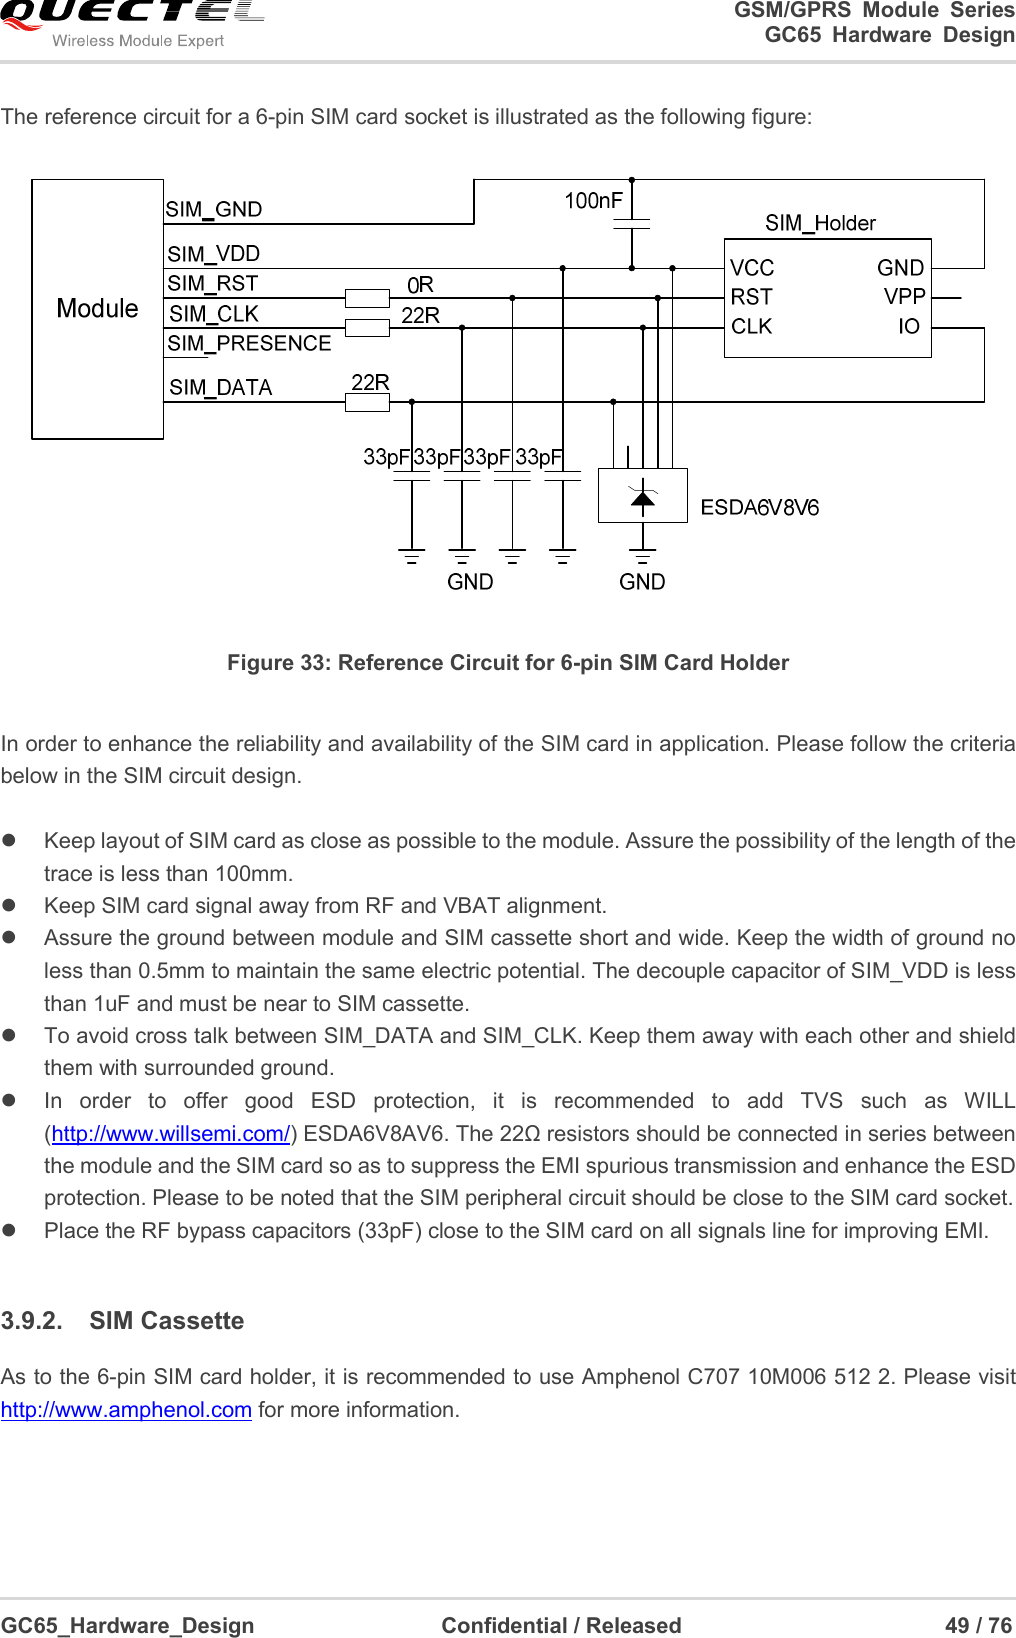                                                                          GSM/GPRS  Module  Series                                                                 GC65 Hardware Design  GC65_Hardware_Design                                  Confidential / Released                                                49 / 76      The reference circuit for a 6-pin SIM card socket is illustrated as the following figure:  Figure 33: Reference Circuit for 6-pin SIM Card Holder  In order to enhance the reliability and availability of the SIM card in application. Please follow the criteria below in the SIM circuit design.    Keep layout of SIM card as close as possible to the module. Assure the possibility of the length of the trace is less than 100mm.     Keep SIM card signal away from RF and VBAT alignment.   Assure the ground between module and SIM cassette short and wide. Keep the width of ground no less than 0.5mm to maintain the same electric potential. The decouple capacitor of SIM_VDD is less than 1uF and must be near to SIM cassette.       To avoid cross talk between SIM_DATA and SIM_CLK. Keep them away with each other and shield them with surrounded ground.     In  order  to  offer  good  ESD  protection,  it  is  recommended  to  add  TVS  such  as  WILL (http://www.willsemi.com/) ESDA6V8AV6. The 22Ω resistors should be connected in series between the module and the SIM card so as to suppress the EMI spurious transmission and enhance the ESD protection. Please to be noted that the SIM peripheral circuit should be close to the SIM card socket.   Place the RF bypass capacitors (33pF) close to the SIM card on all signals line for improving EMI.     3.9.2.  SIM Cassette As to the 6-pin SIM card holder, it is recommended to use Amphenol C707 10M006 512 2. Please visit http://www.amphenol.com for more information.      